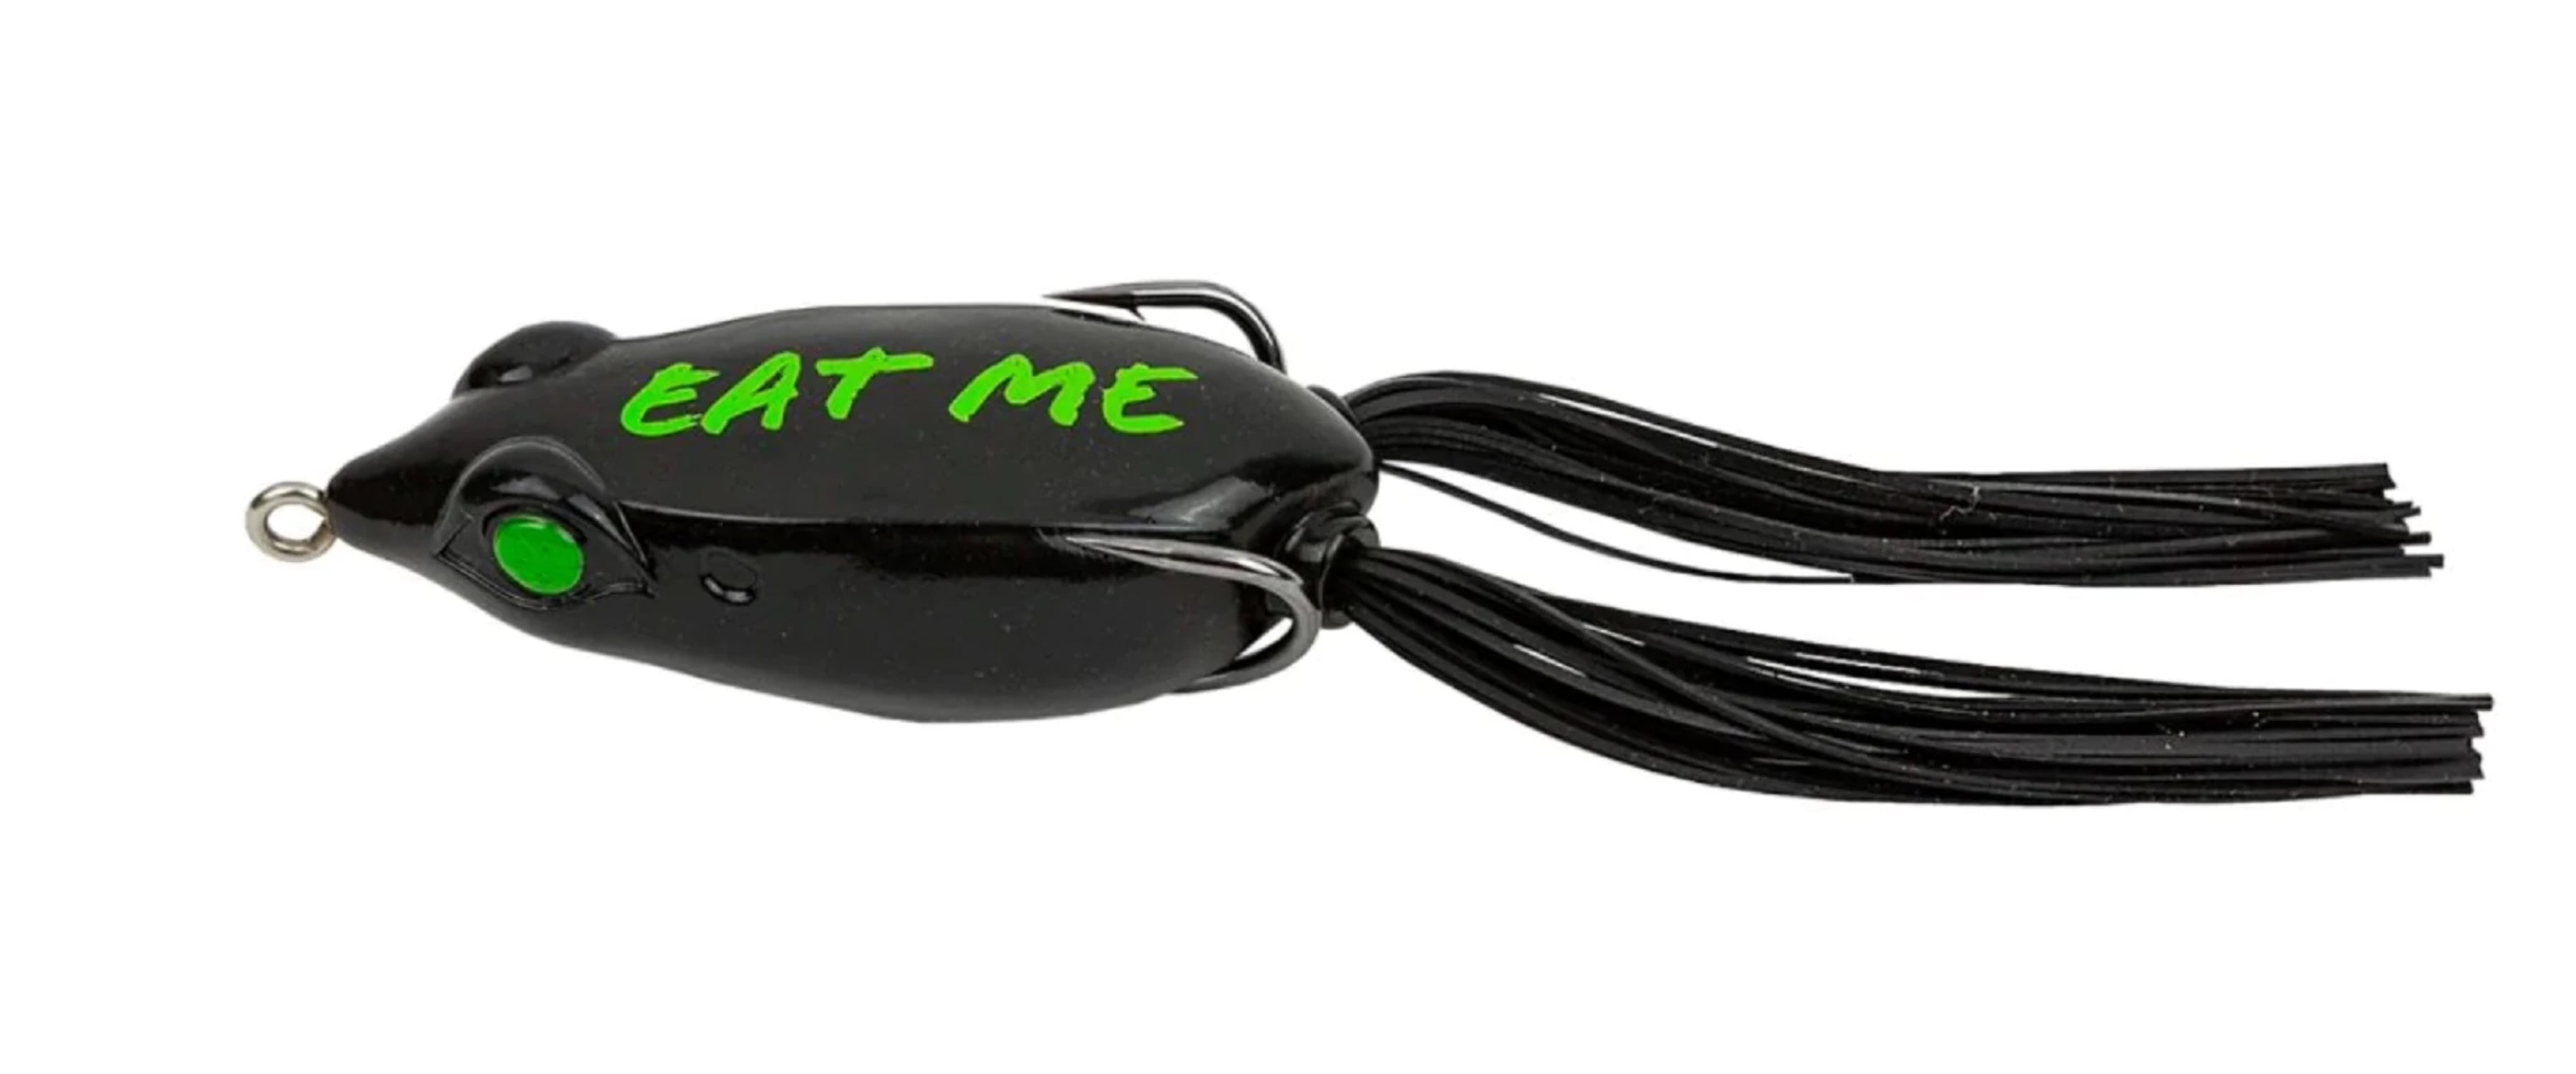 Gee Wiz Frog Lure - Fin & Flame